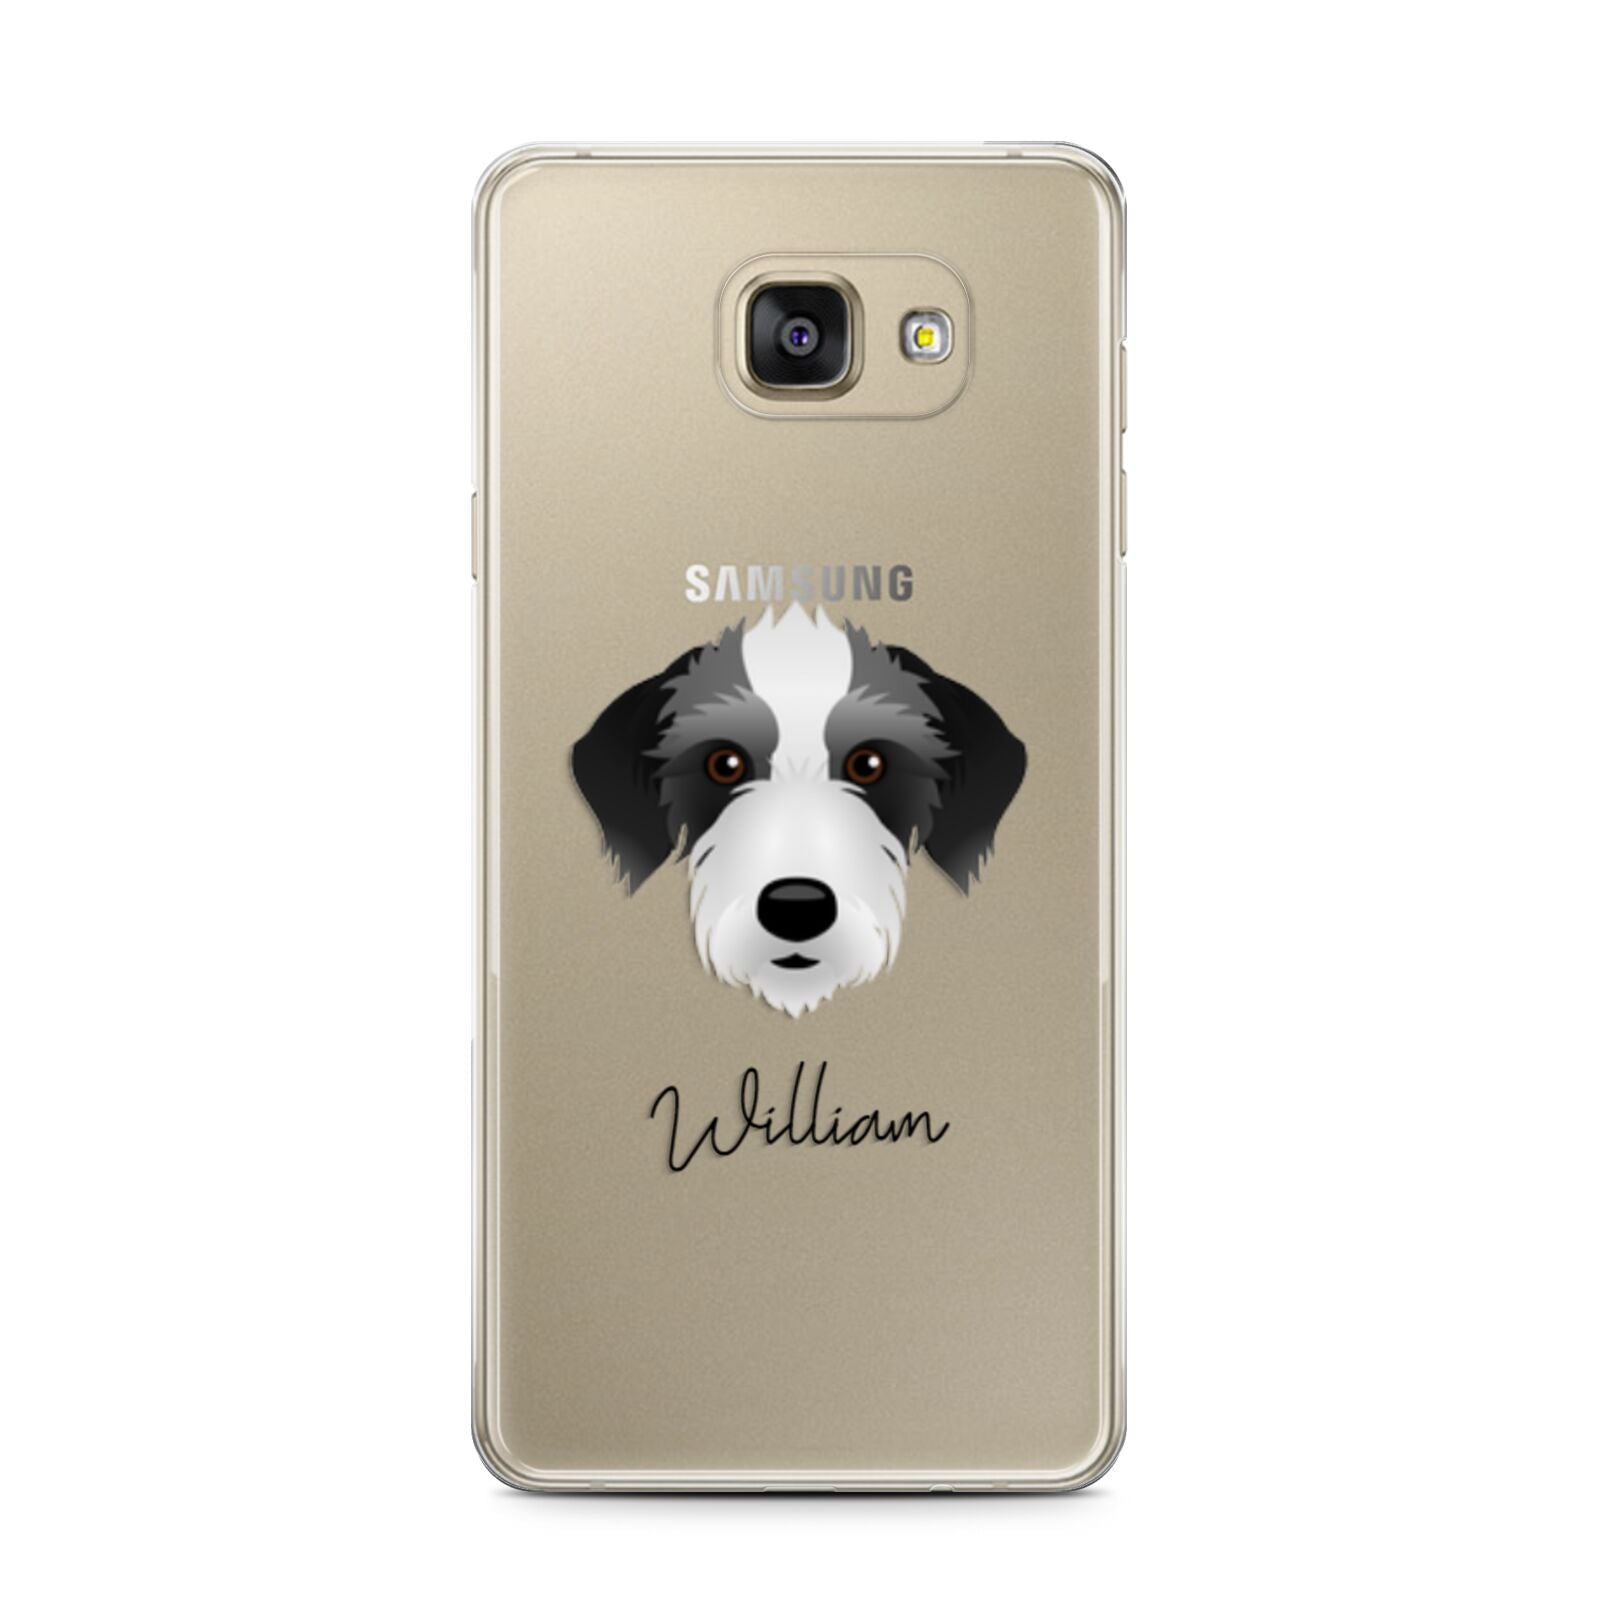 Bedlington Whippet Personalised Samsung Galaxy A7 2016 Case on gold phone